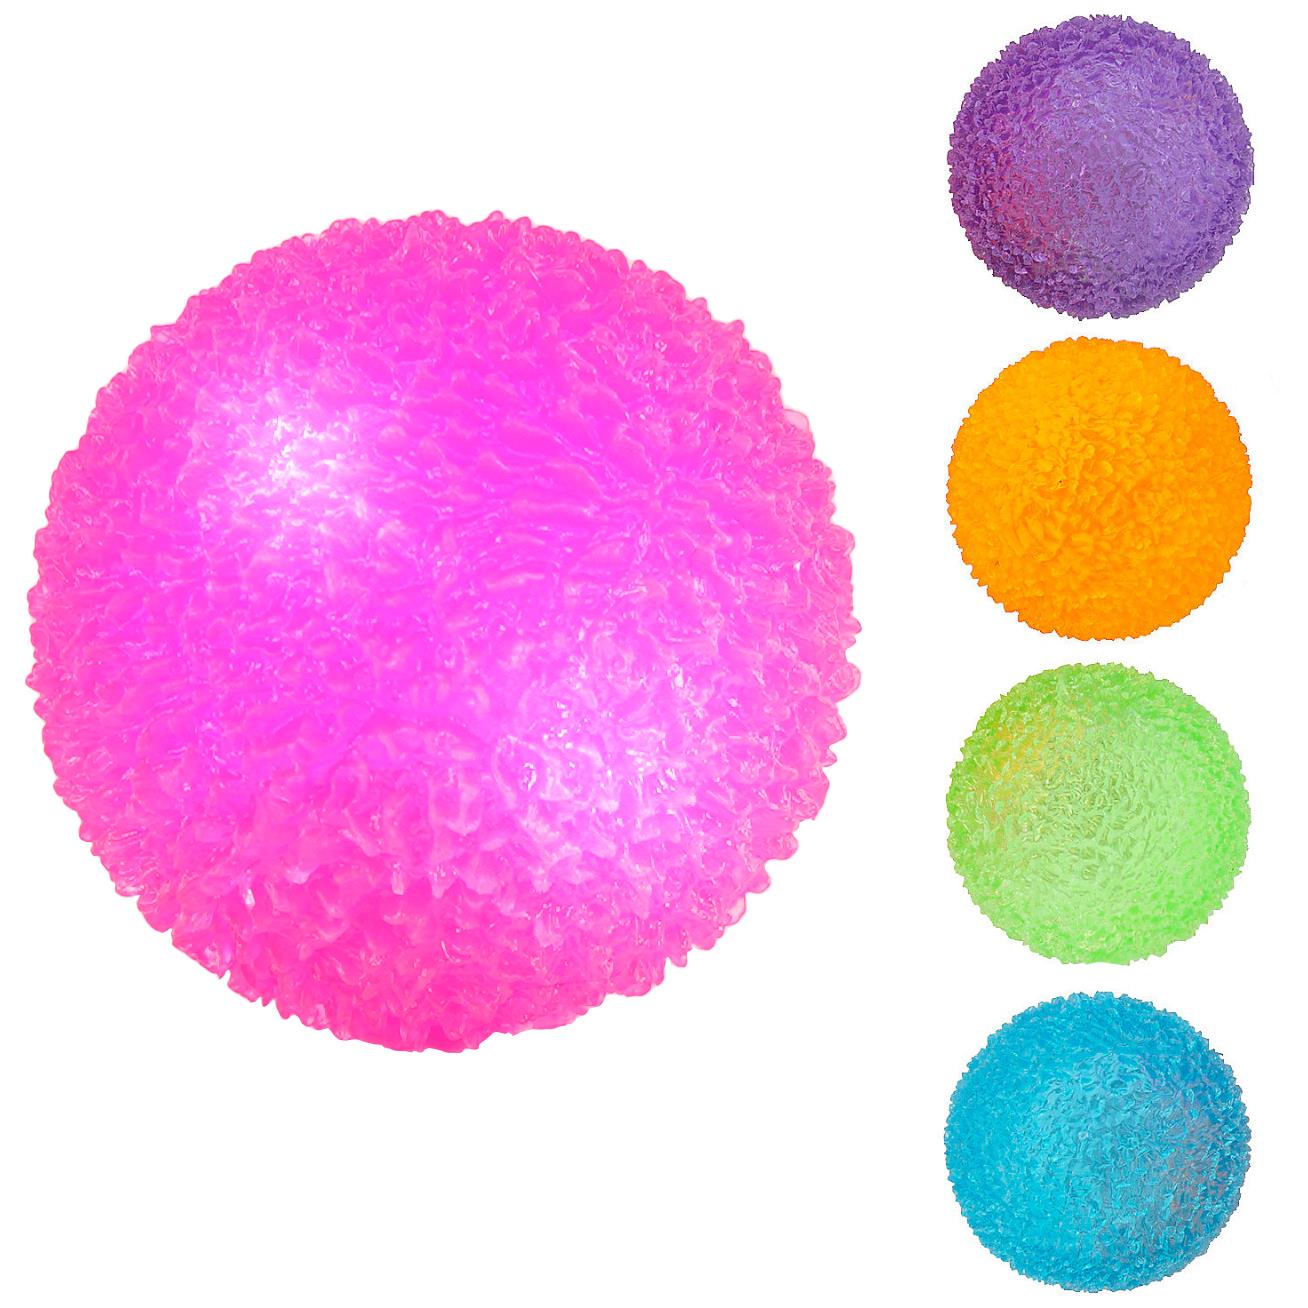 Flashing Rubber Bouncy Ball by The Magic Toy Shop - The Magic Toy Shop